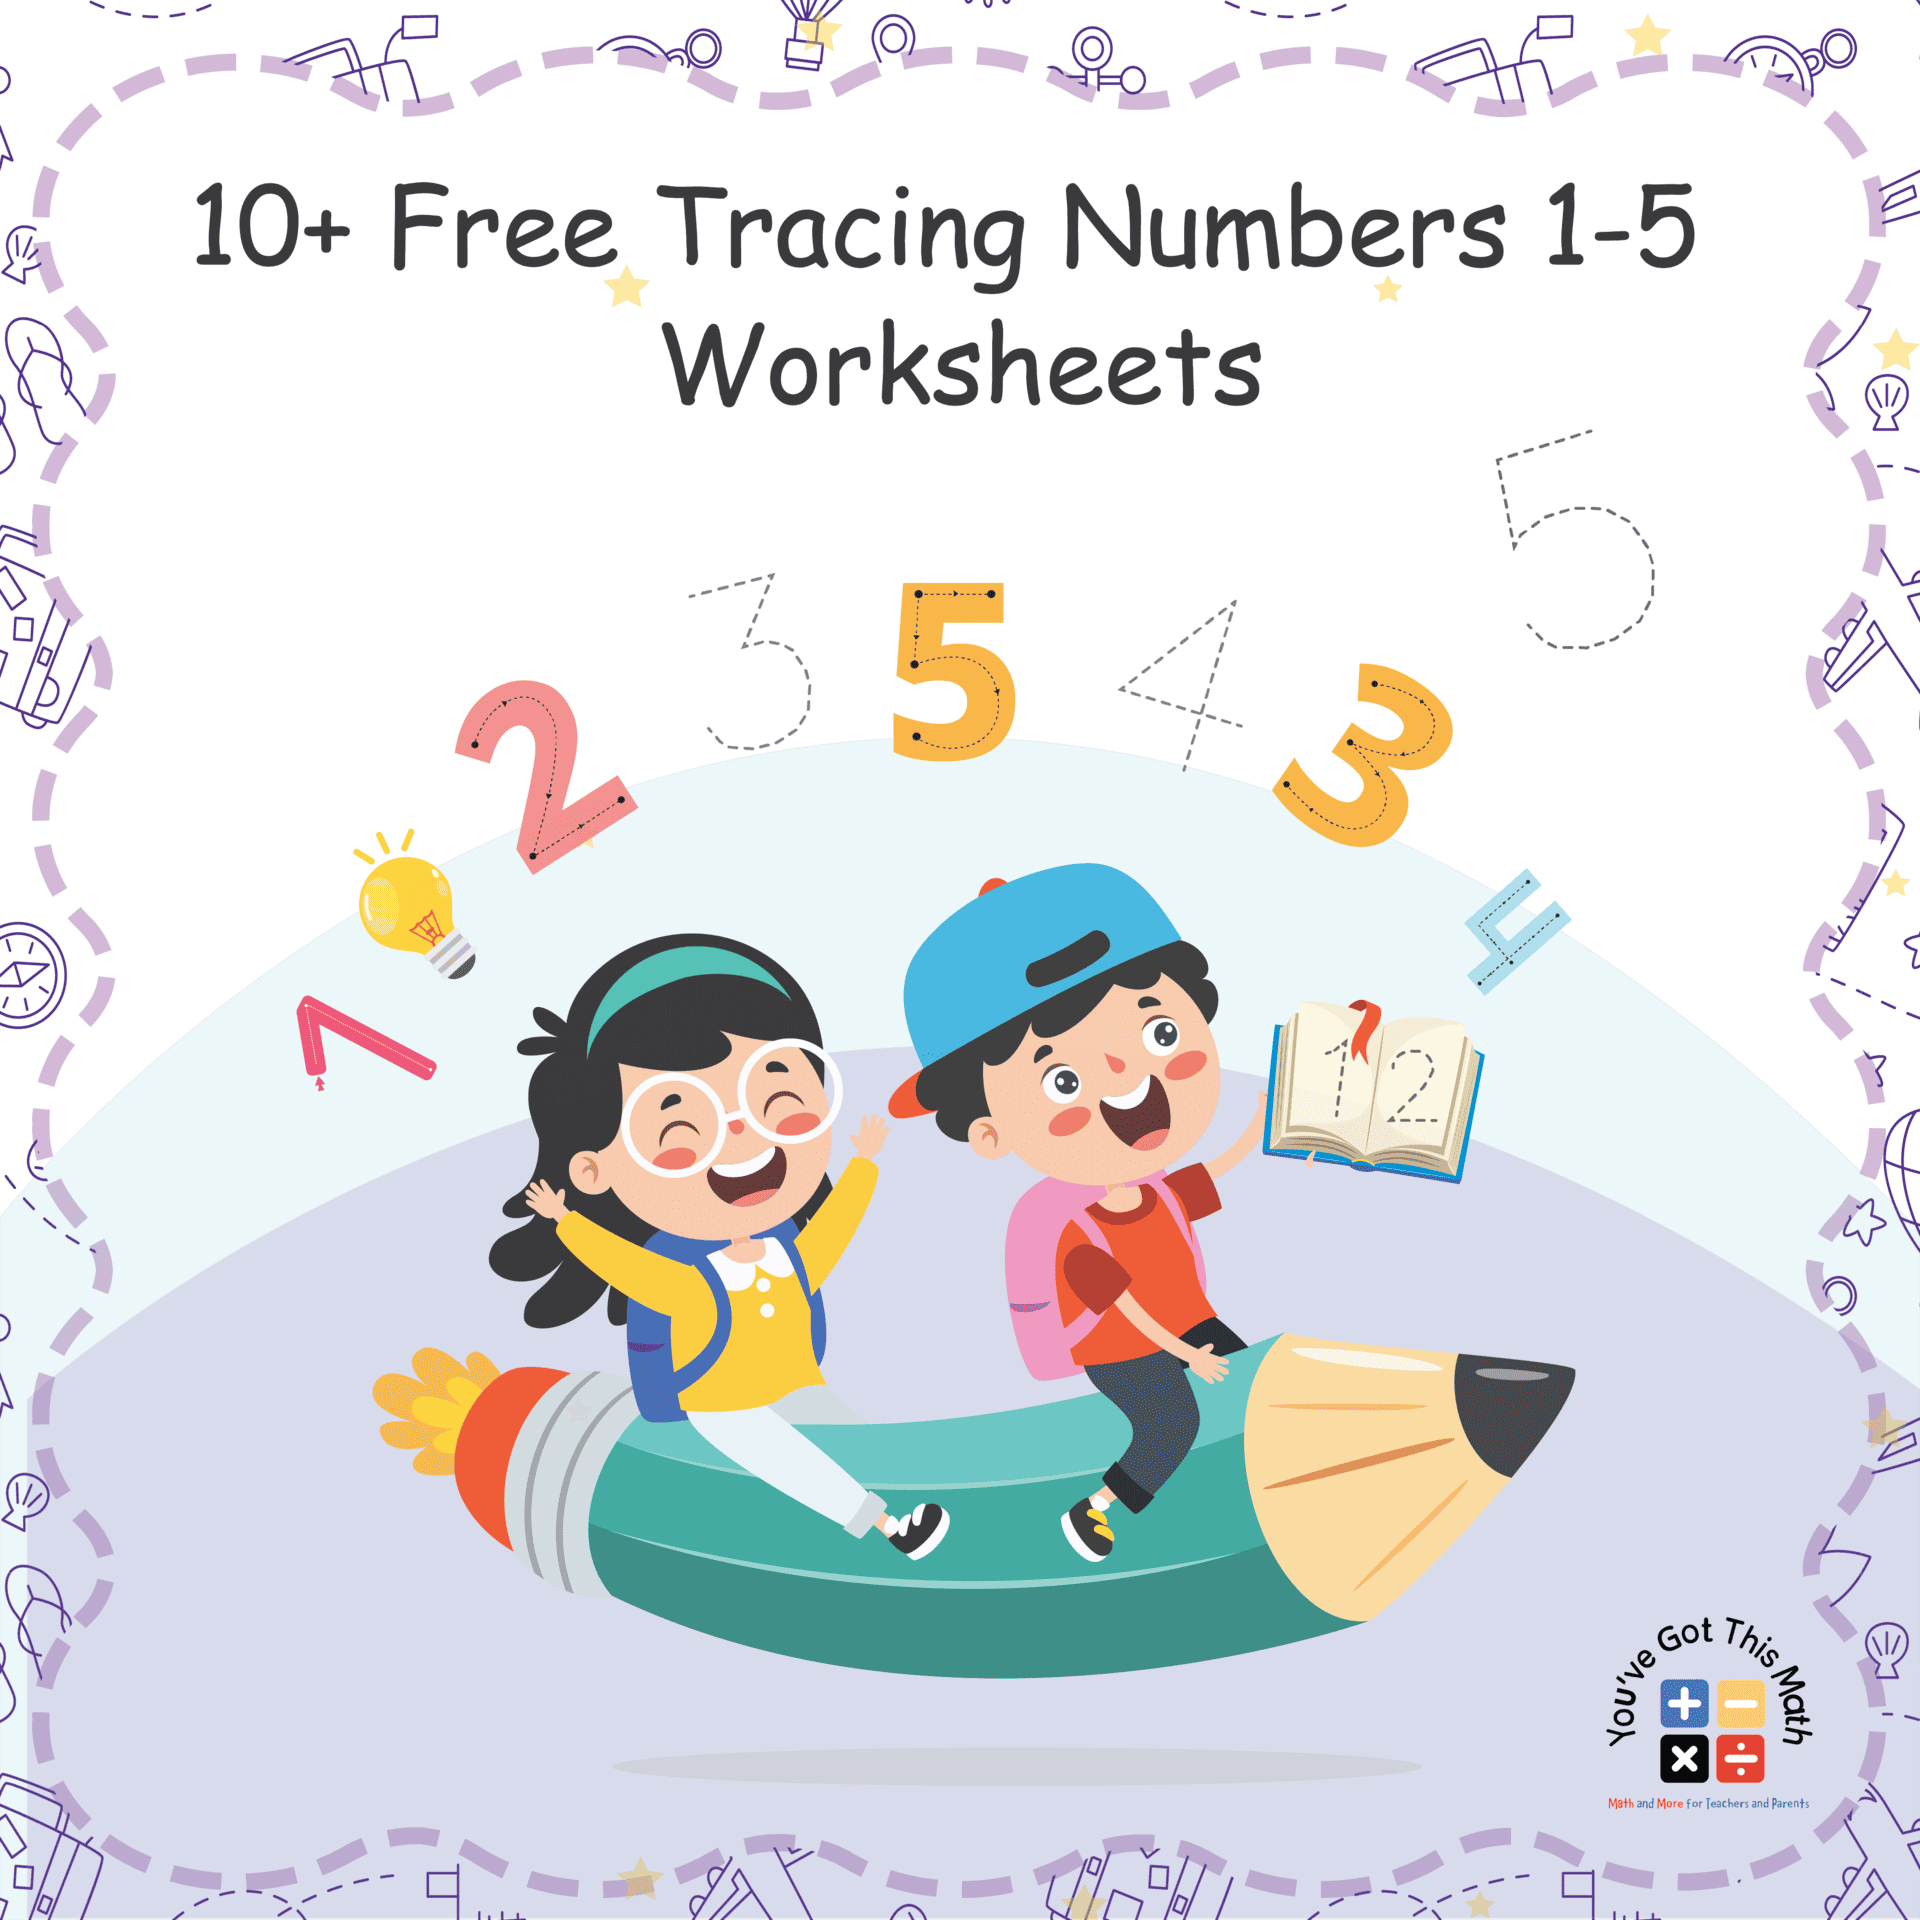 8 Free Tracing Numbers 1-5 Worksheets | Fun Activities